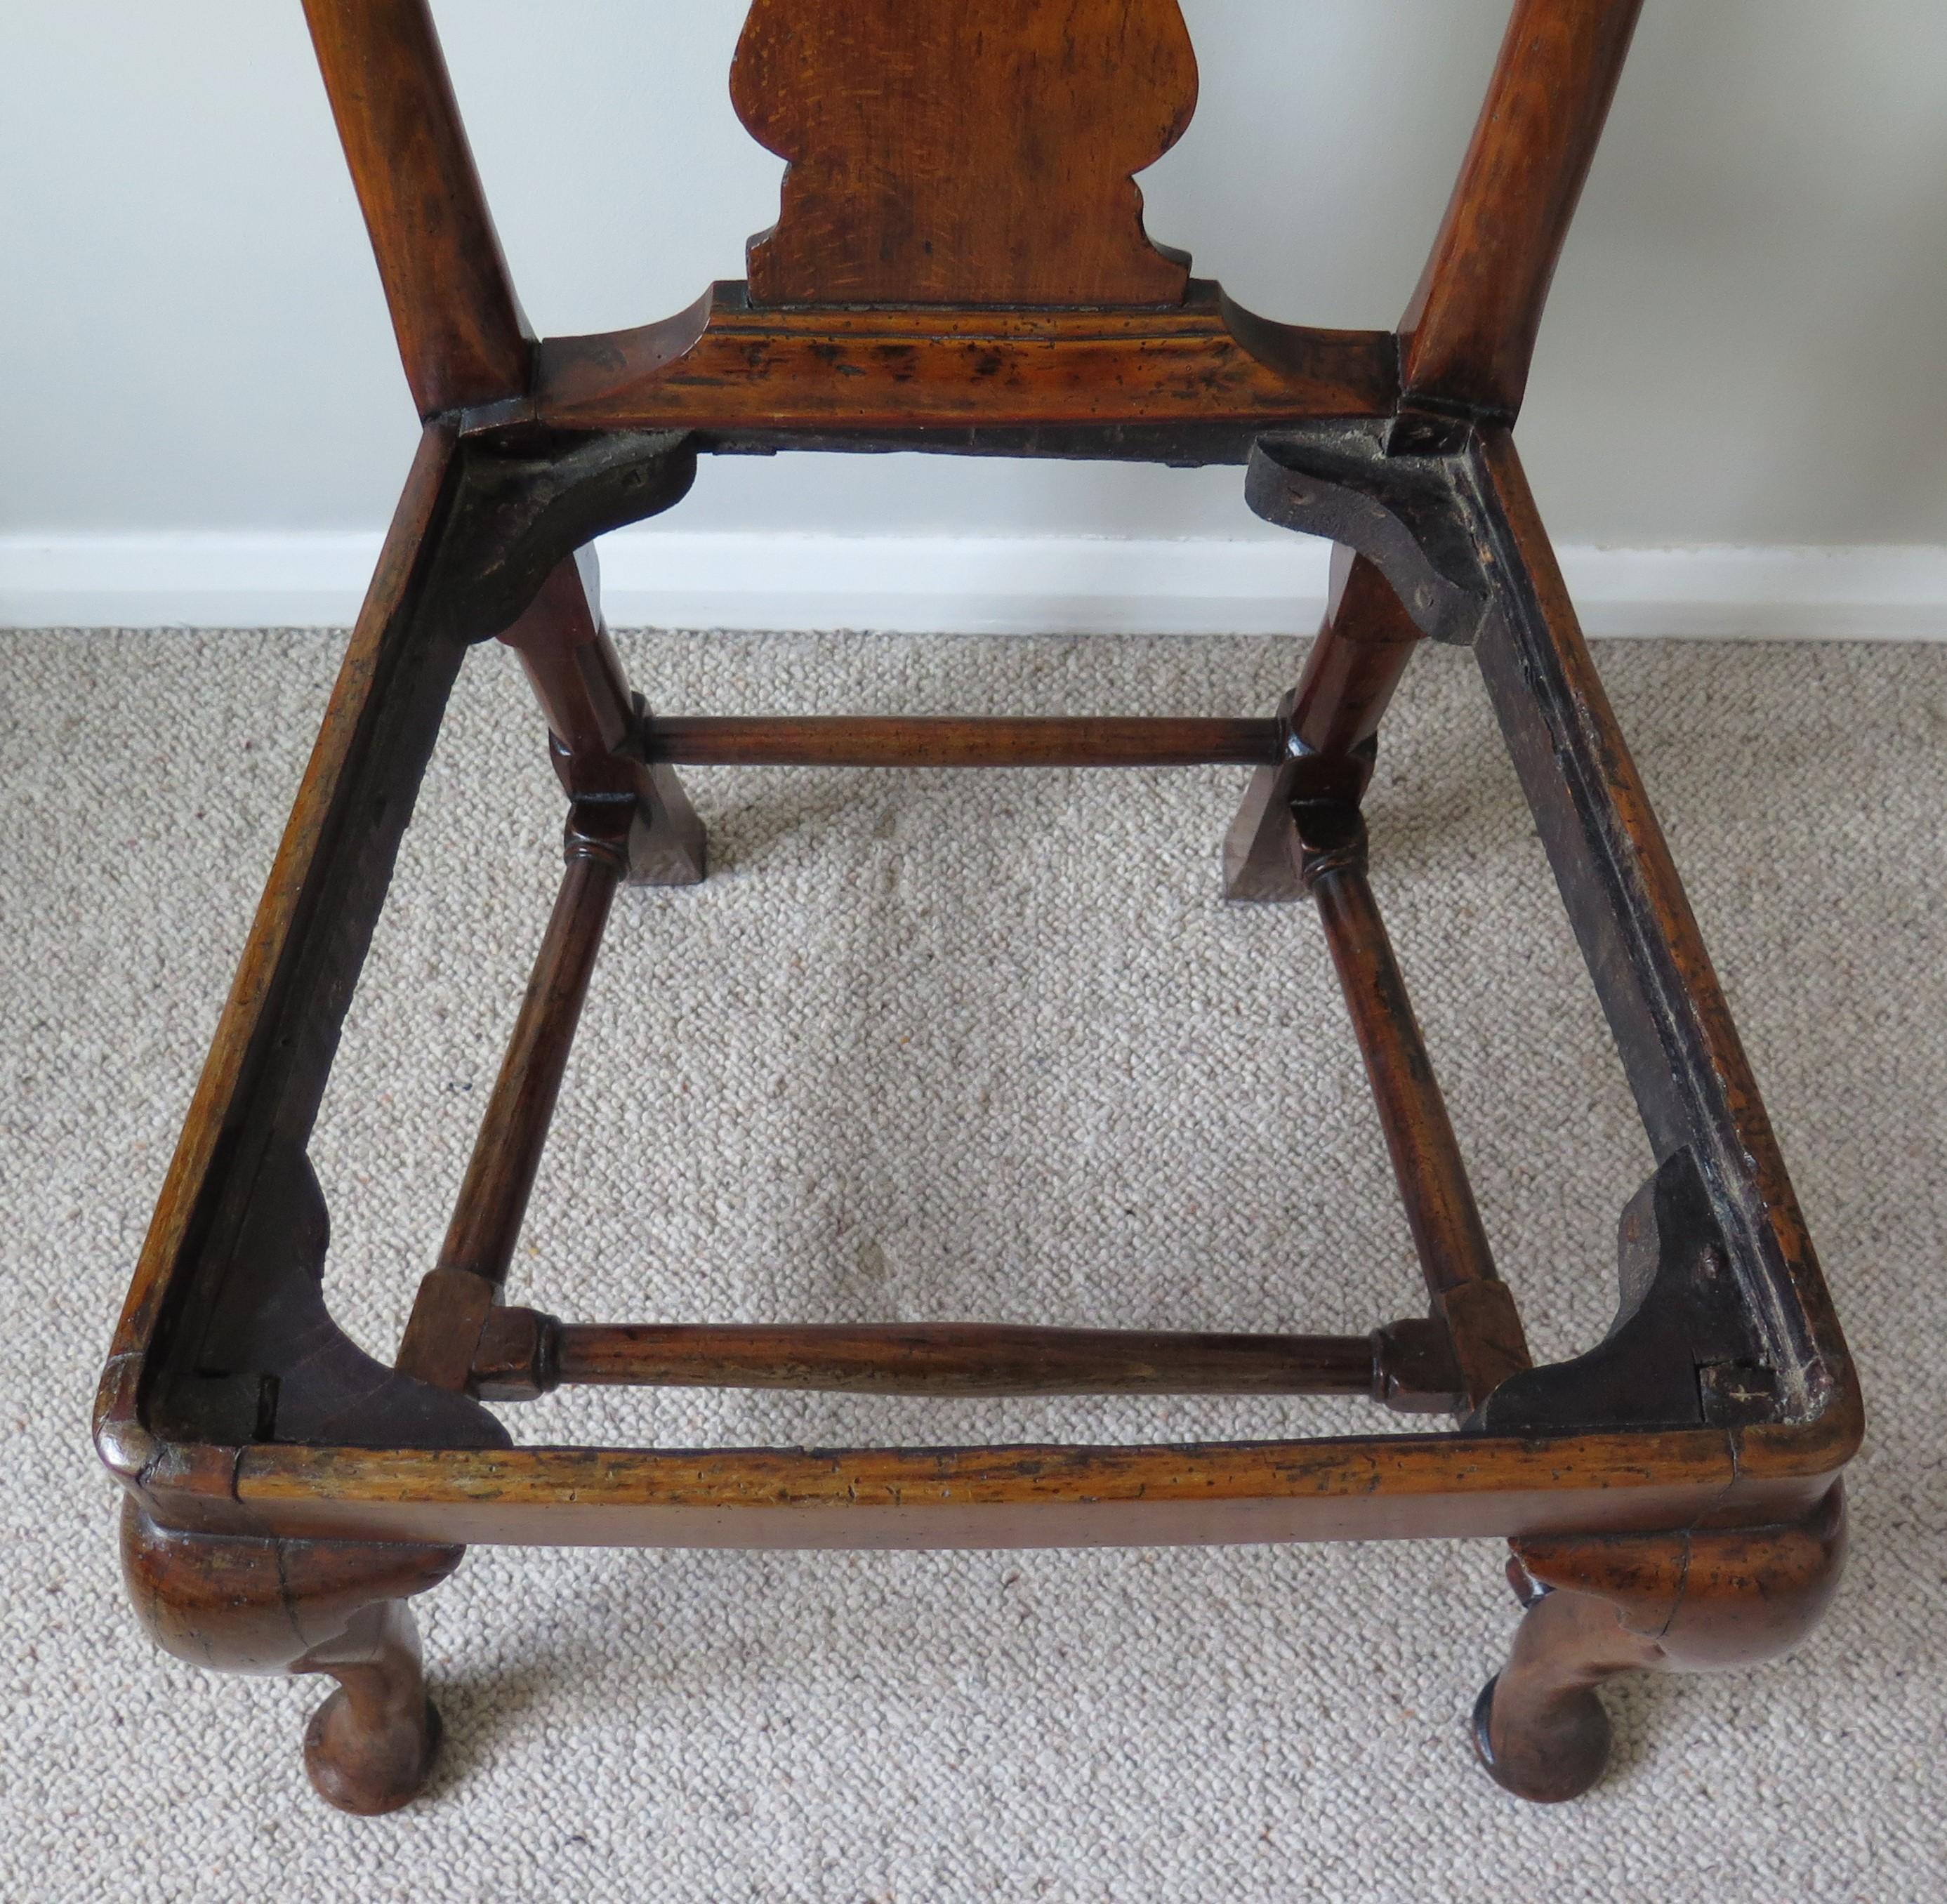 Queen Anne Period Walnut Chair Cabriole Legs and Stretchers, English circa 1700 For Sale 5